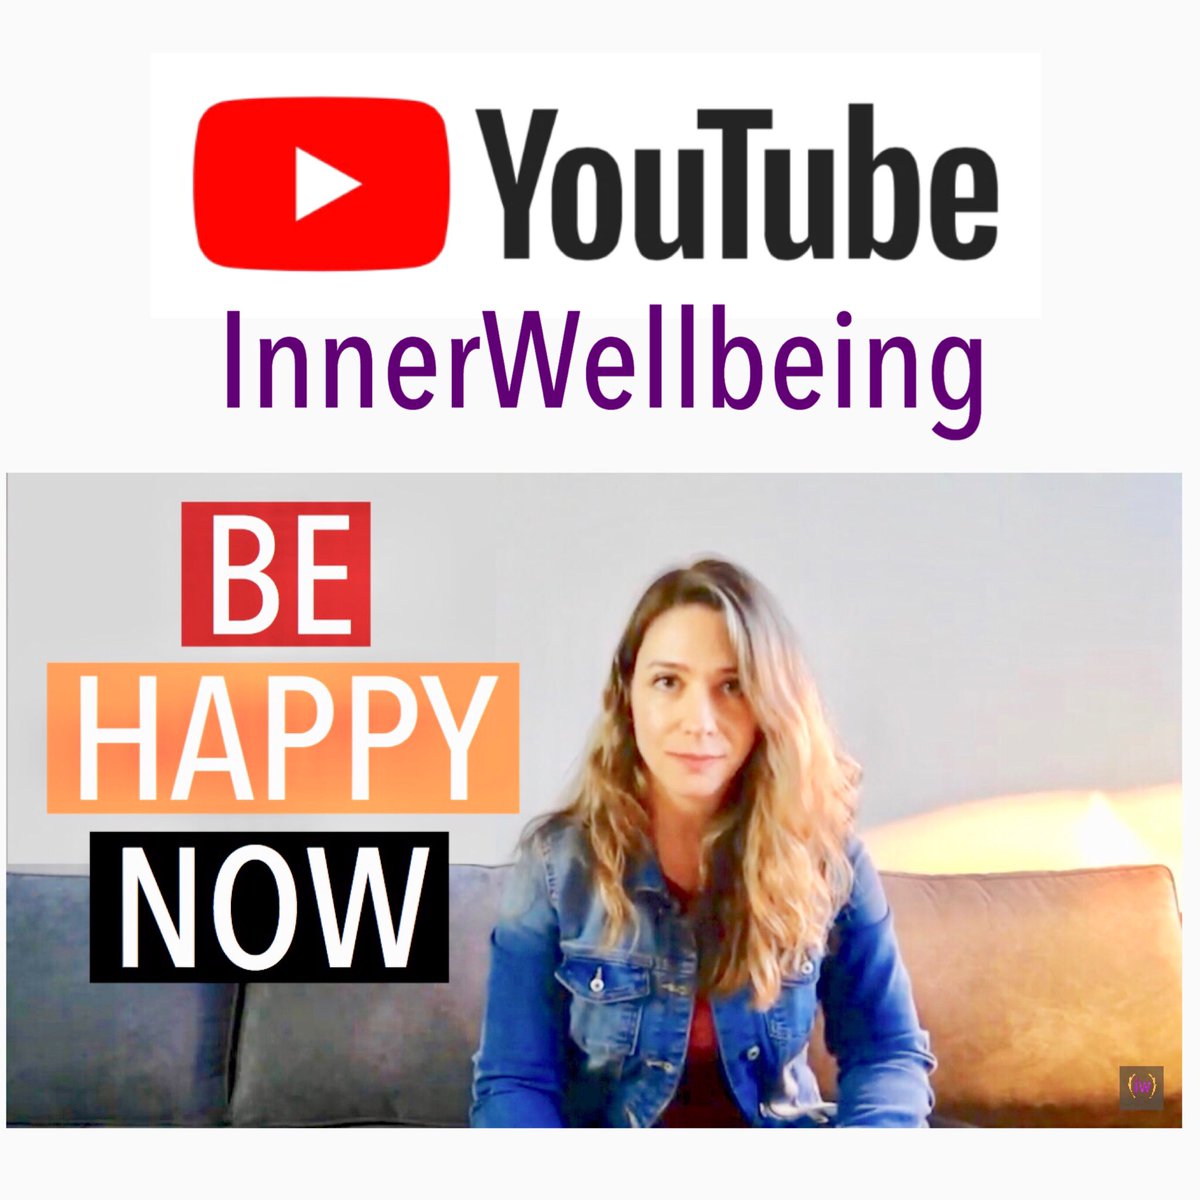 New Tuesday Video! youtu.be/g4WWAgtYi70
Hope you enjoy it!
Here I give you 10 scientifically- proven ways to be happy.  
#tiptuesday  #youtuber #dallaslifecoach #counselingstudent #counselingpsychology